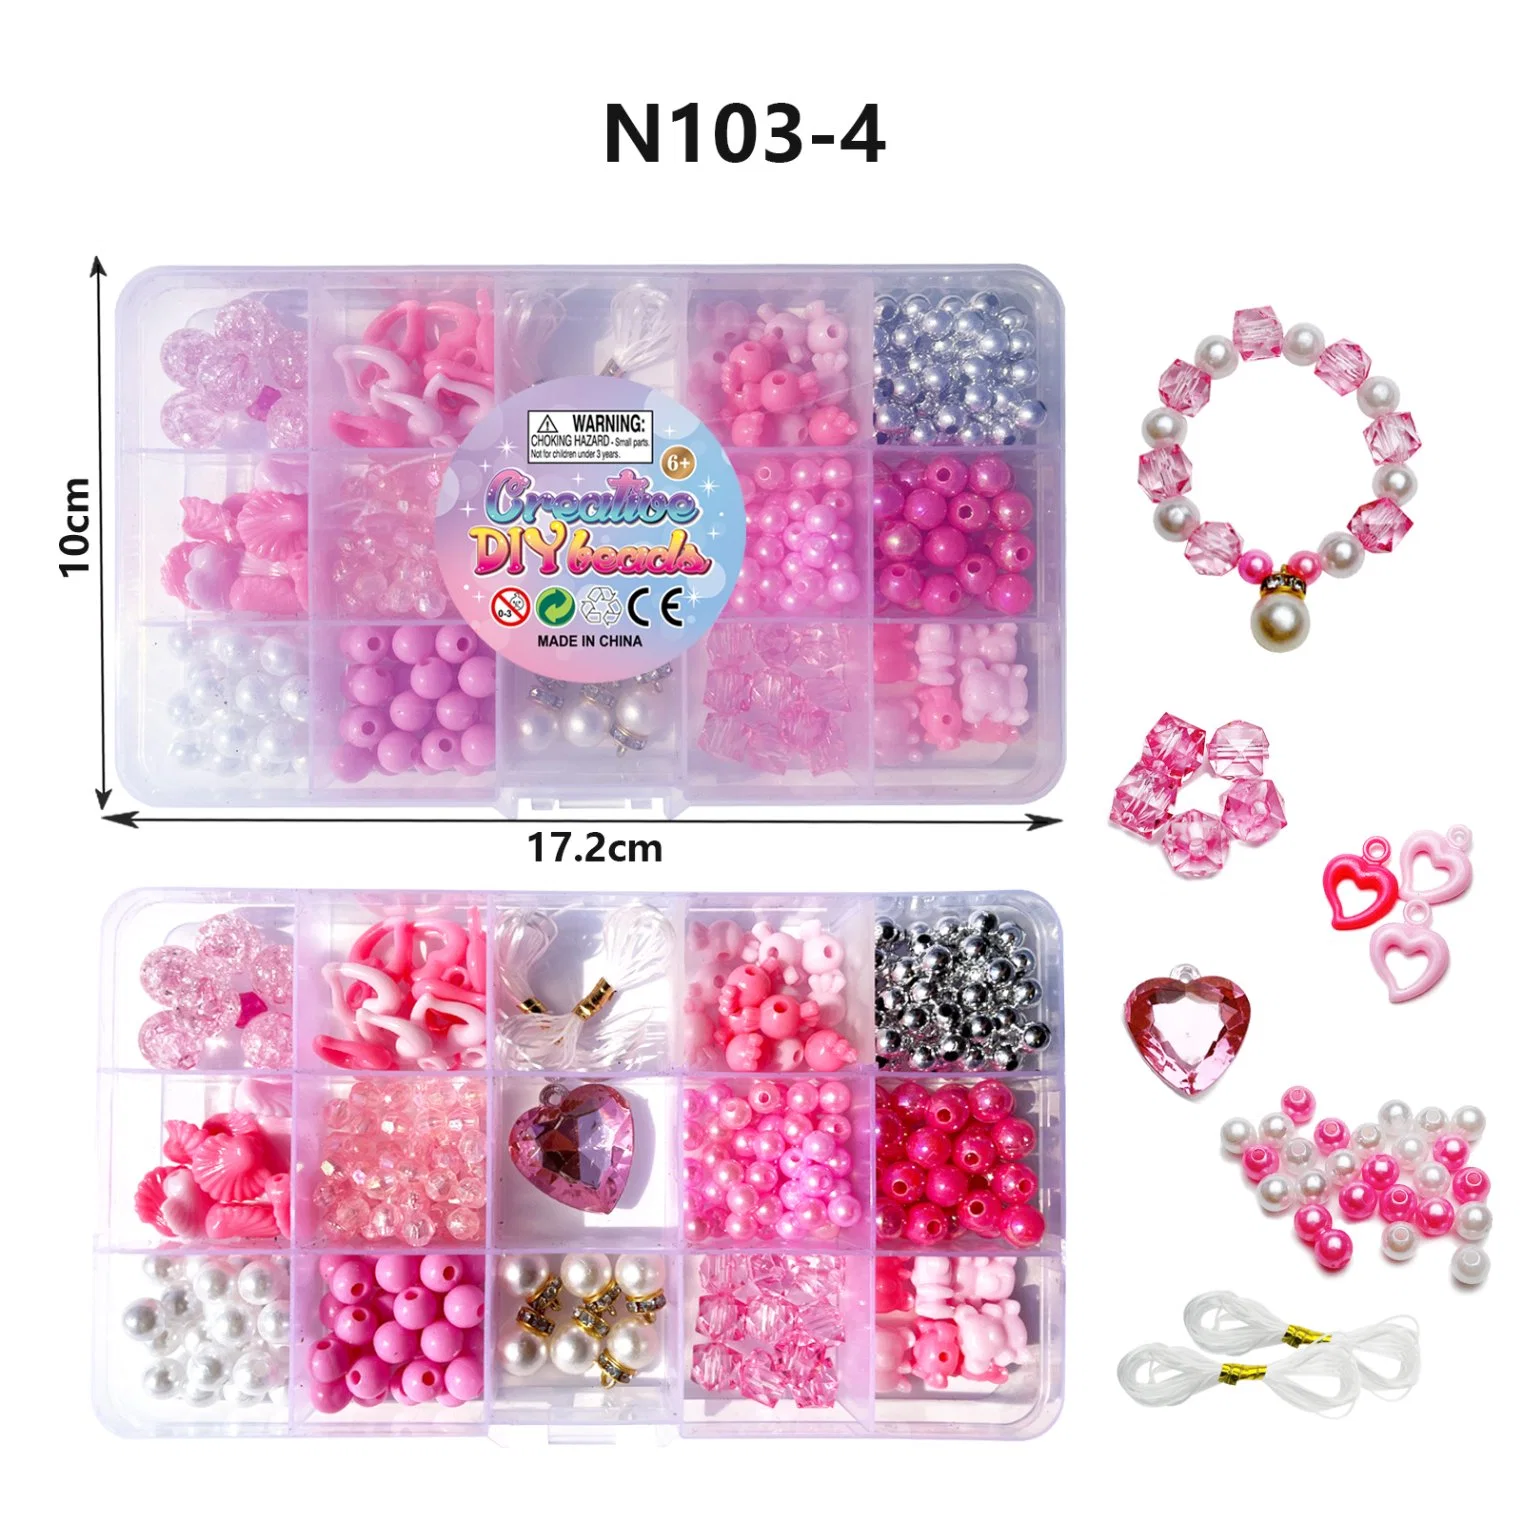 Colourful Bead Jewelry Set Birthday Gifts Promotional Toys Educational Toys